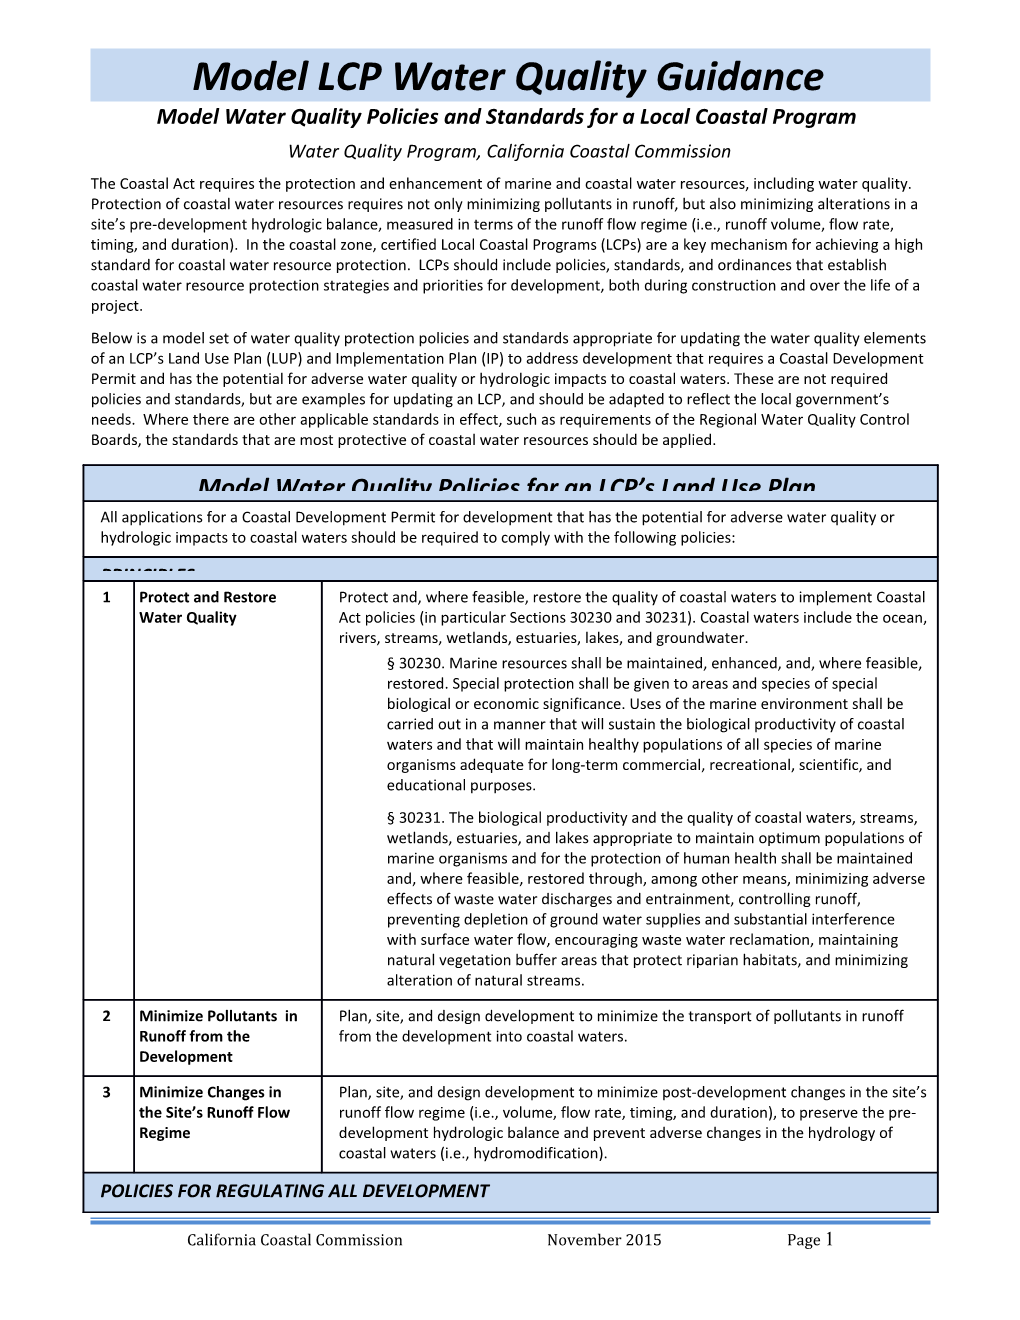 Model Water Quality Policies and Standards for a Local Coastal Program